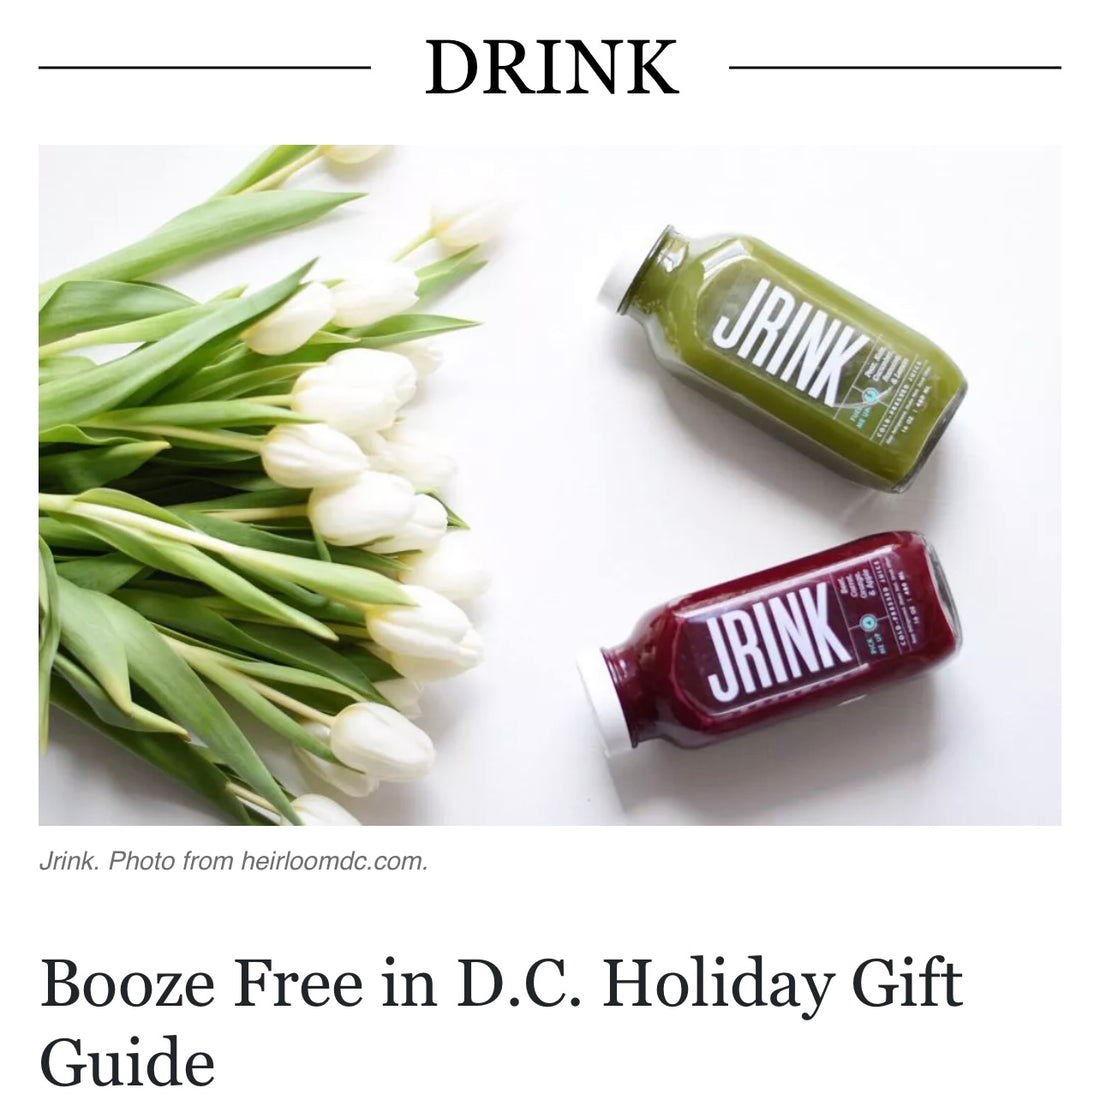 Booze Free in D.C. Holiday Gift Guide